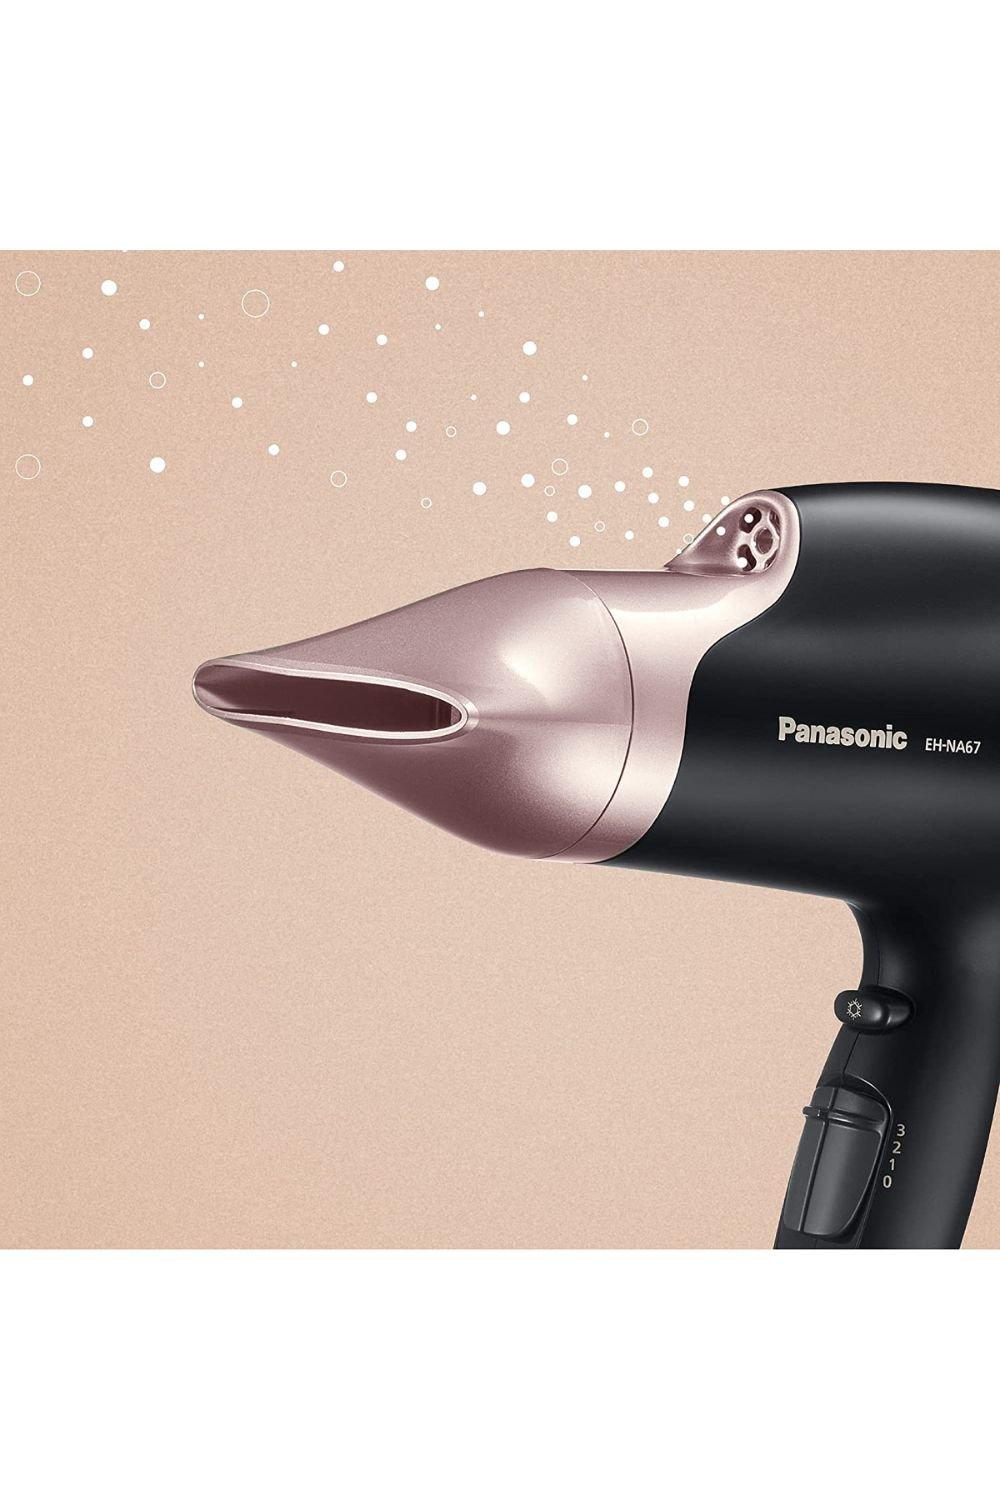 Hair Styling Oscillating Protection | Scalp Gold) Dryer Nozzle Tools nanoe Hair Panasonic EH-NA67 | and for (Pink with Diffuser